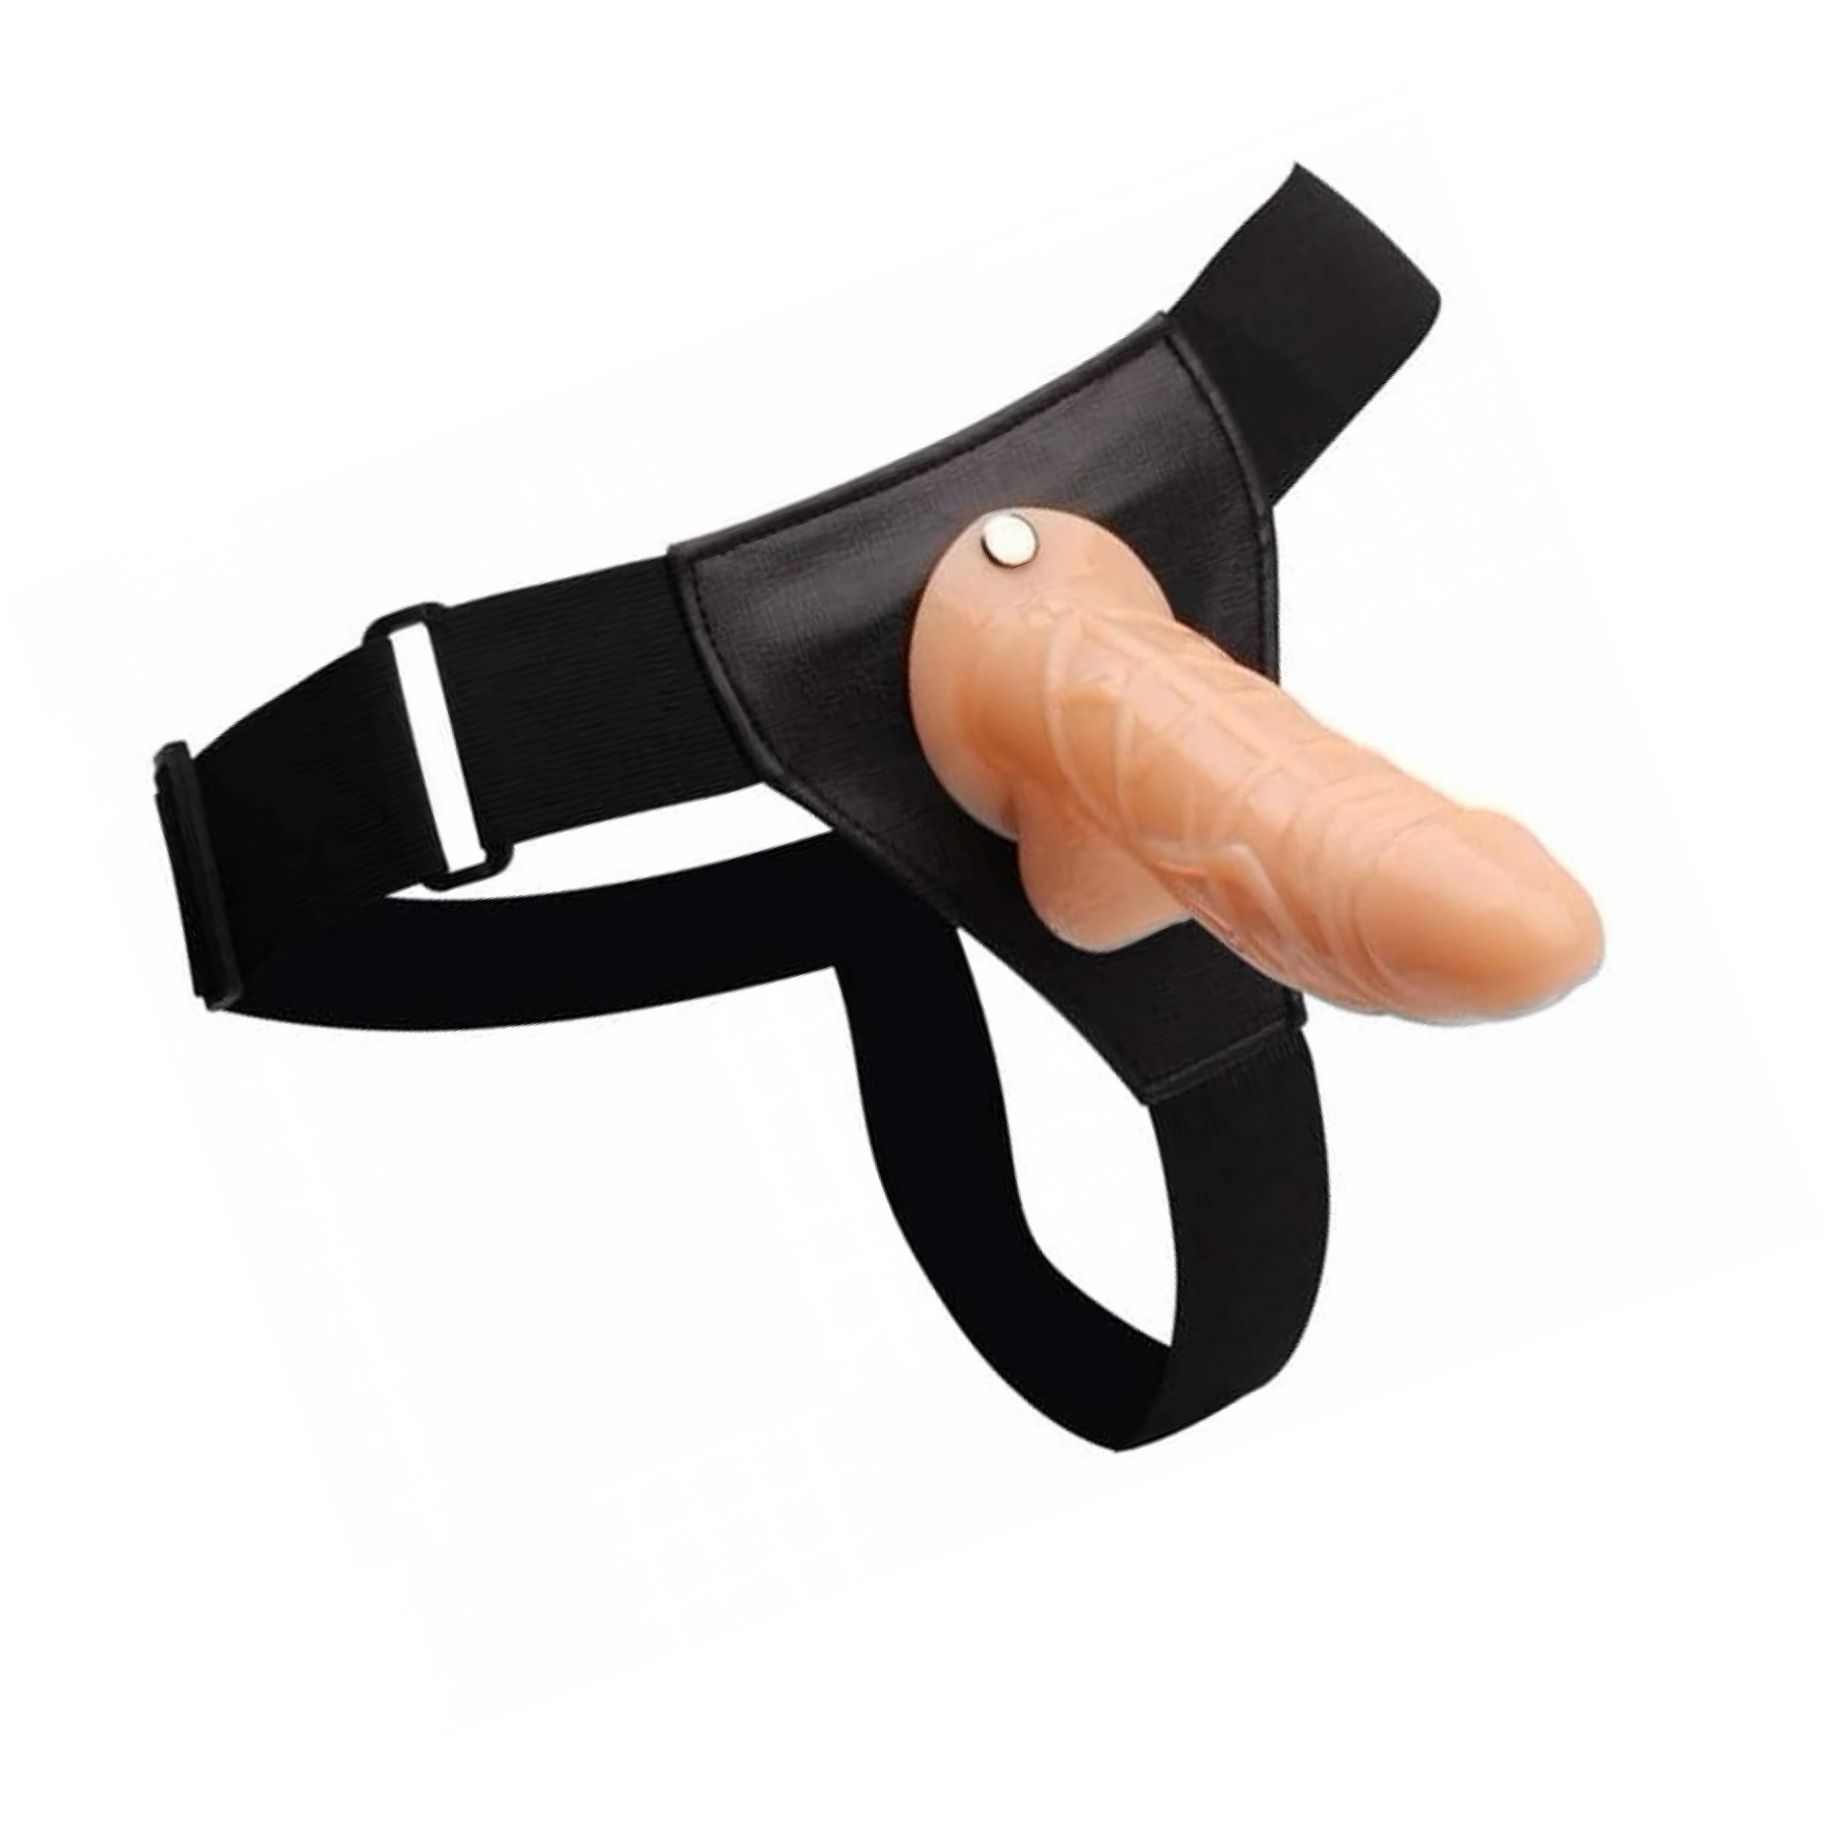 Strap On Hollow Penis